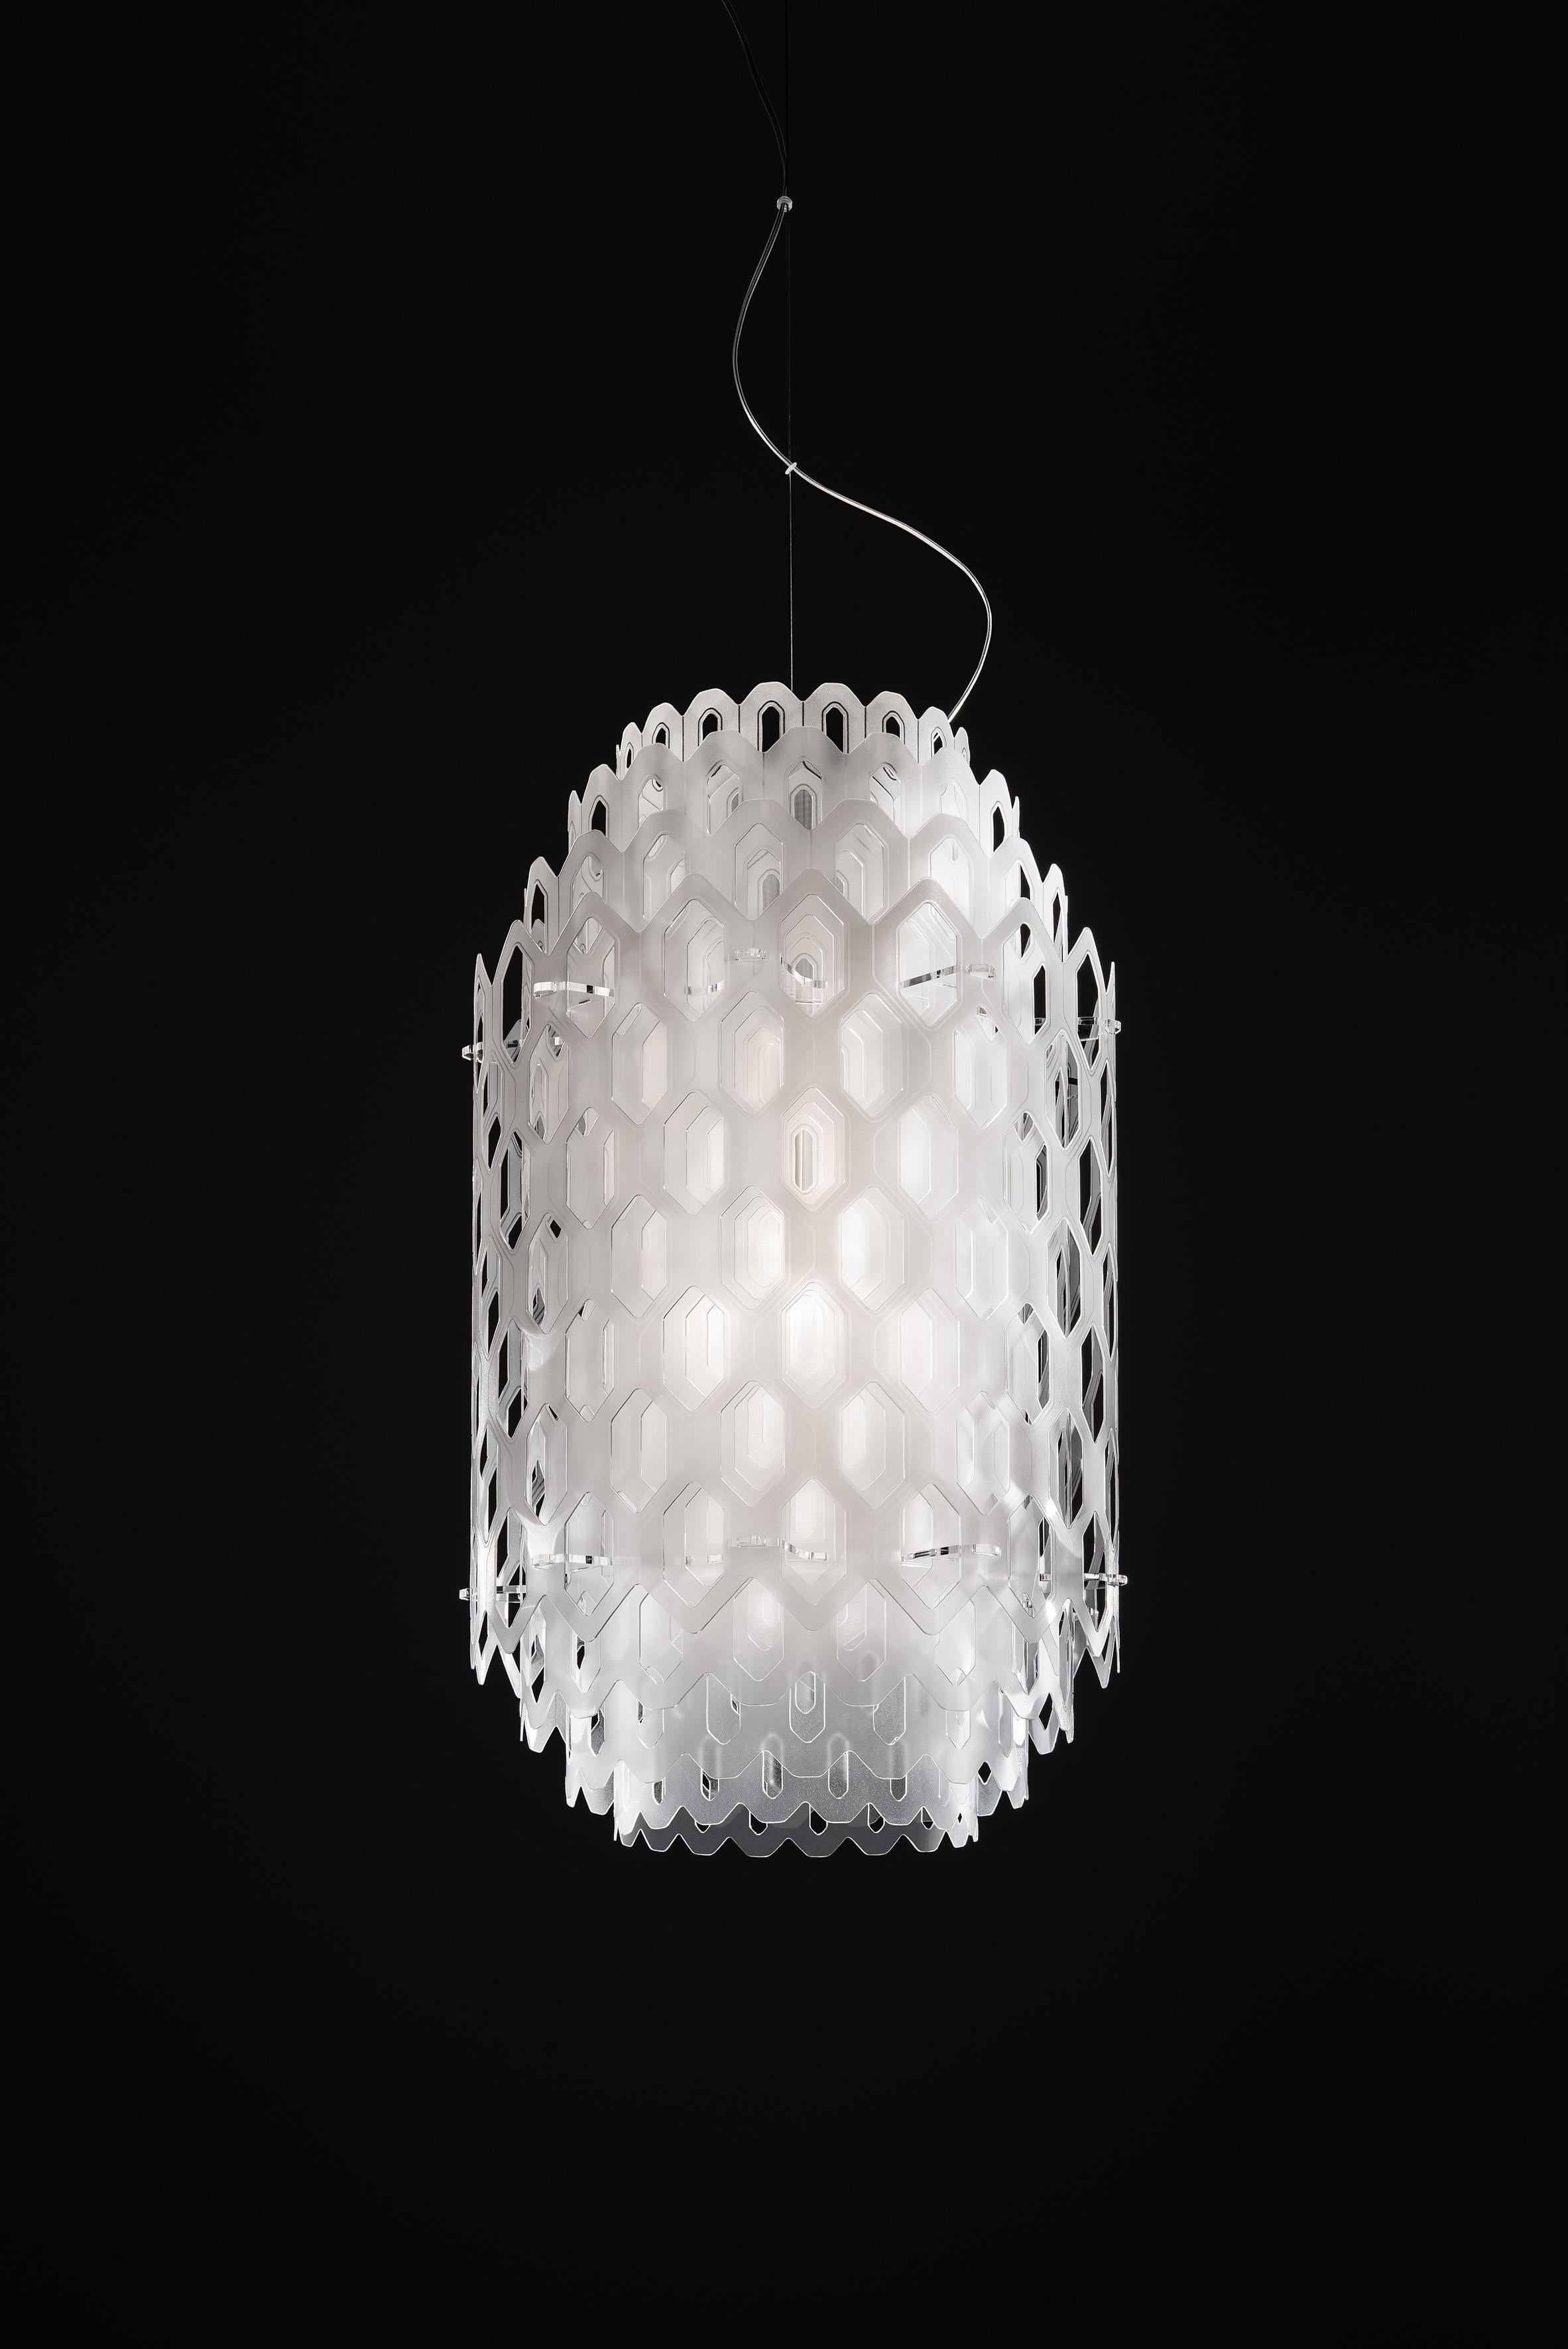 Chantal’s sculptural shape seems to be molded from a singular, industrious frame, much like honeycomb with its impalpable elements. Its concentric, hexagonal shapes allow for unending views. Chatal’s LED source resembles waves pulling away from the